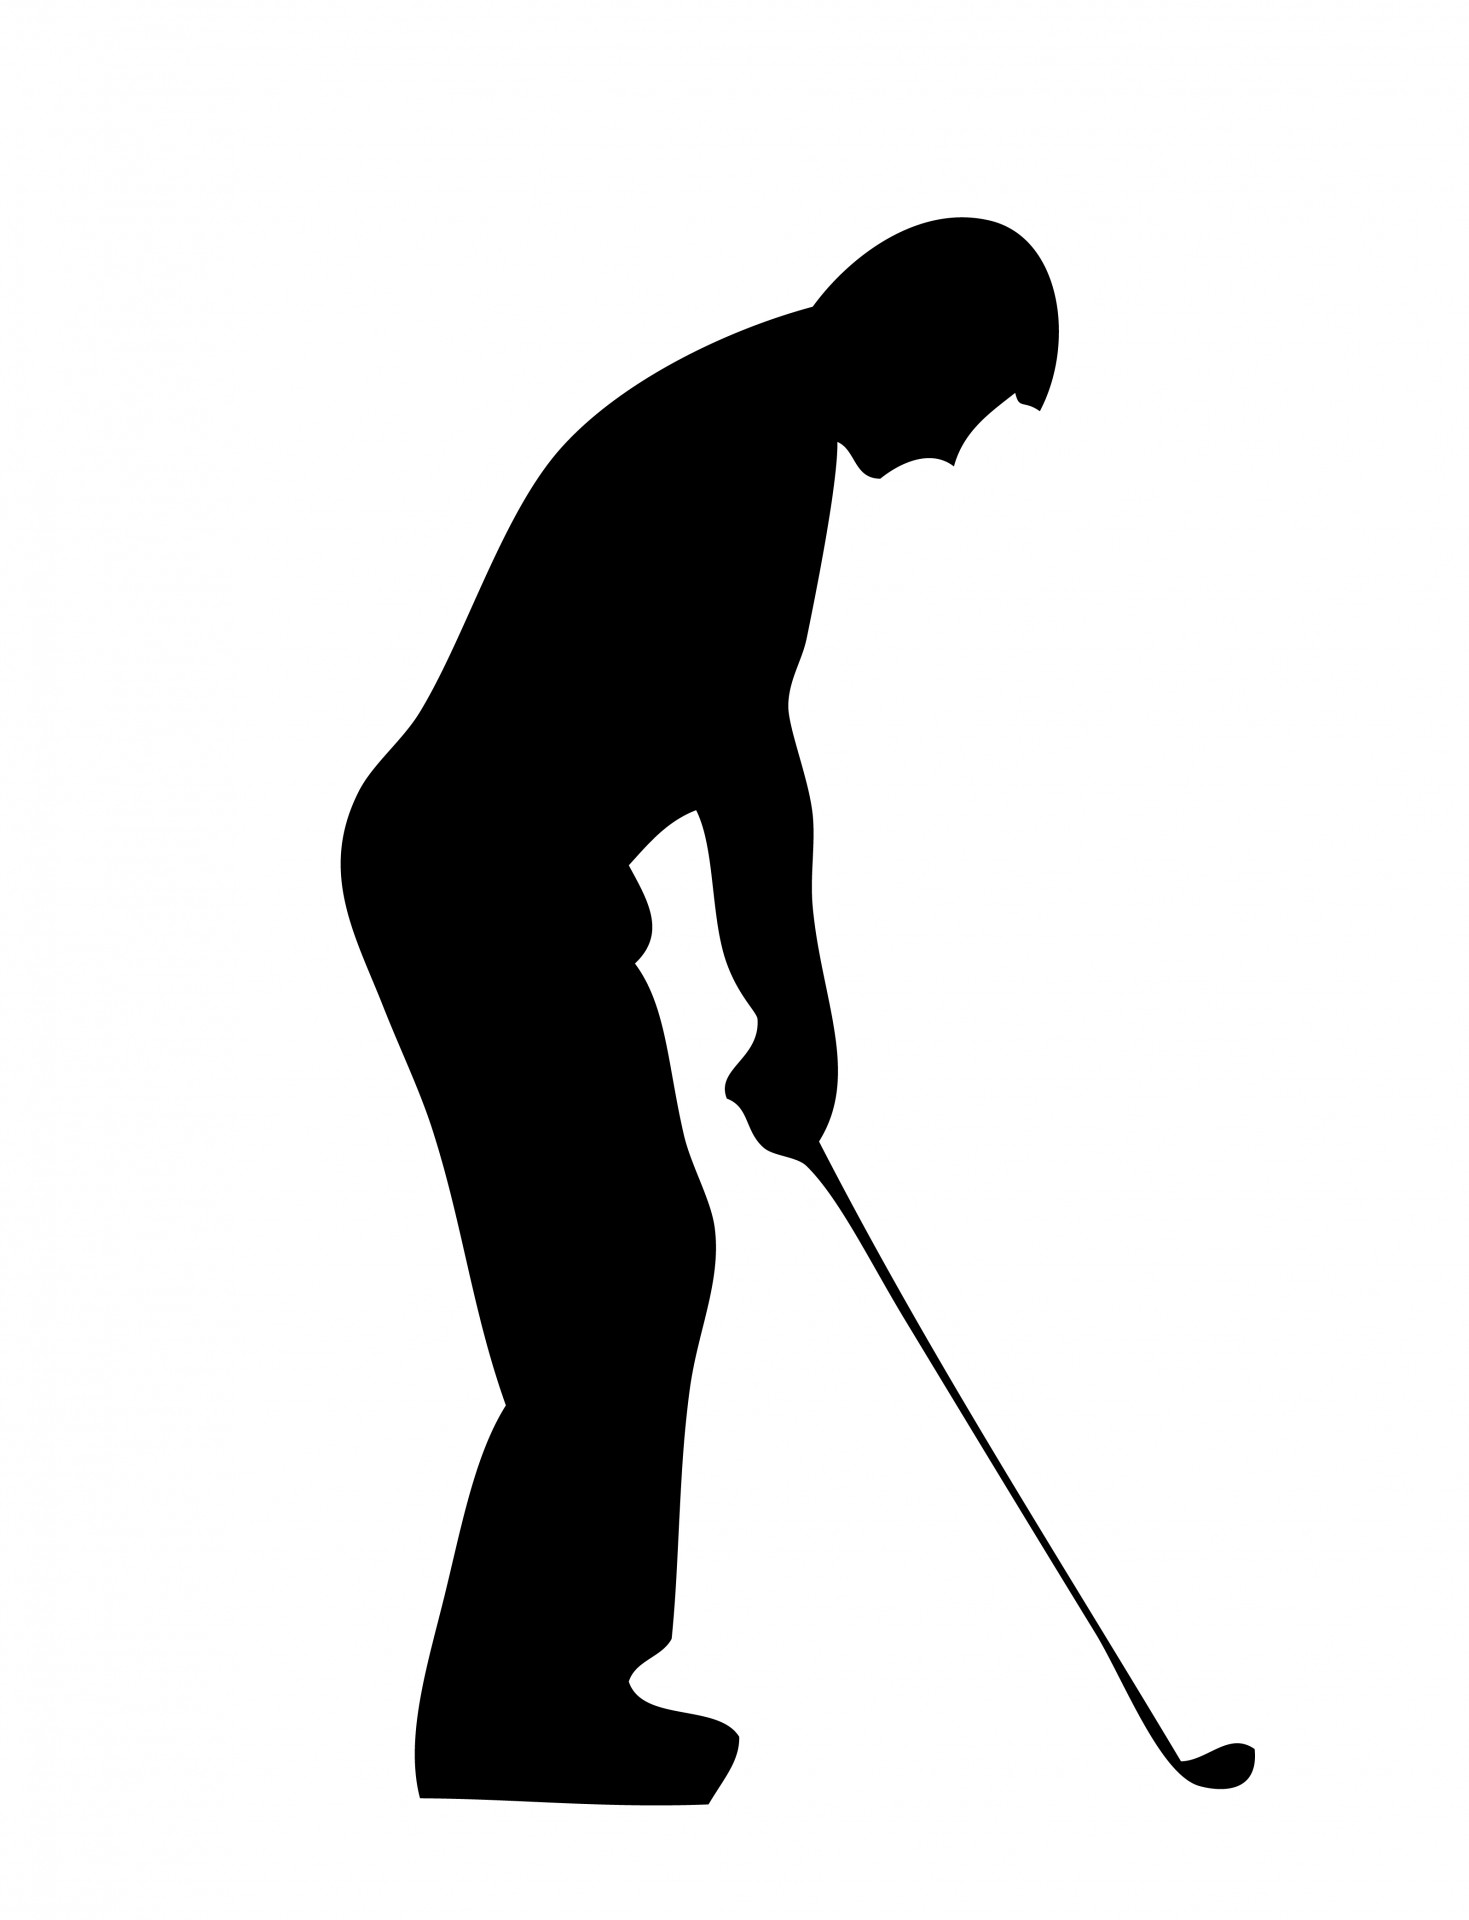 Golf player silhouette clipart free